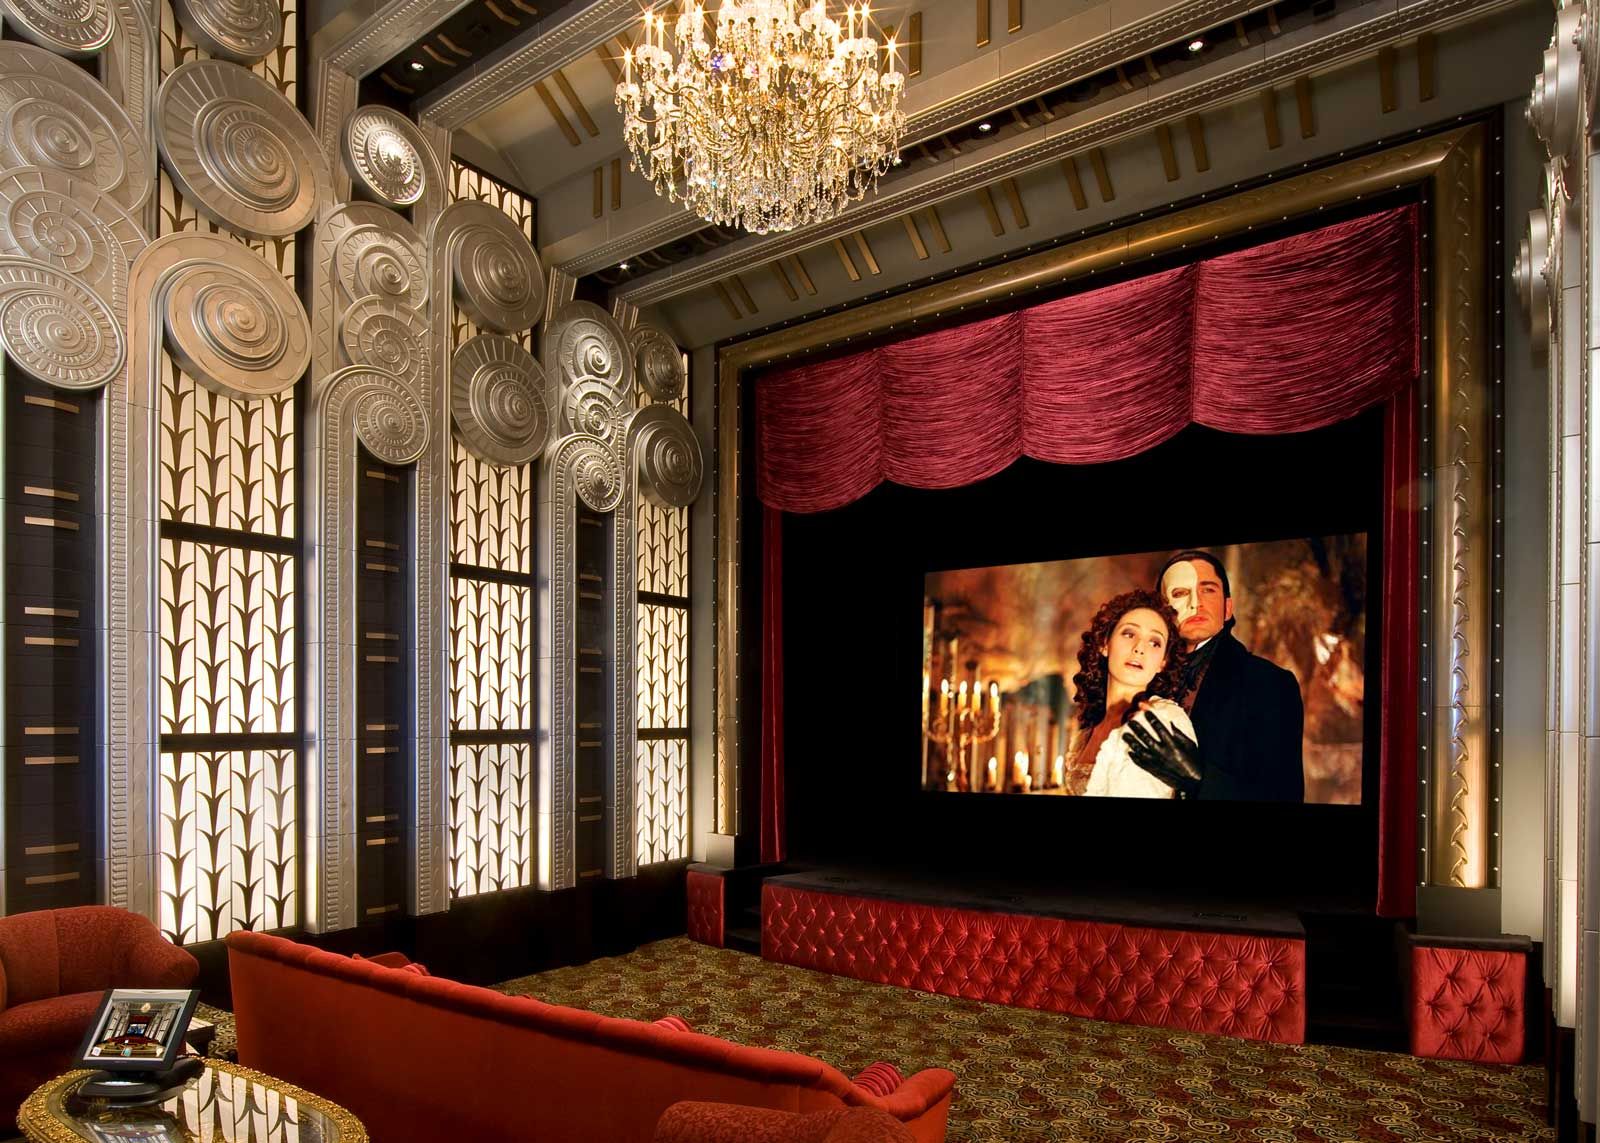 Ritzy Furniture, Traditional, Future Home Theater, Home Theater Installation